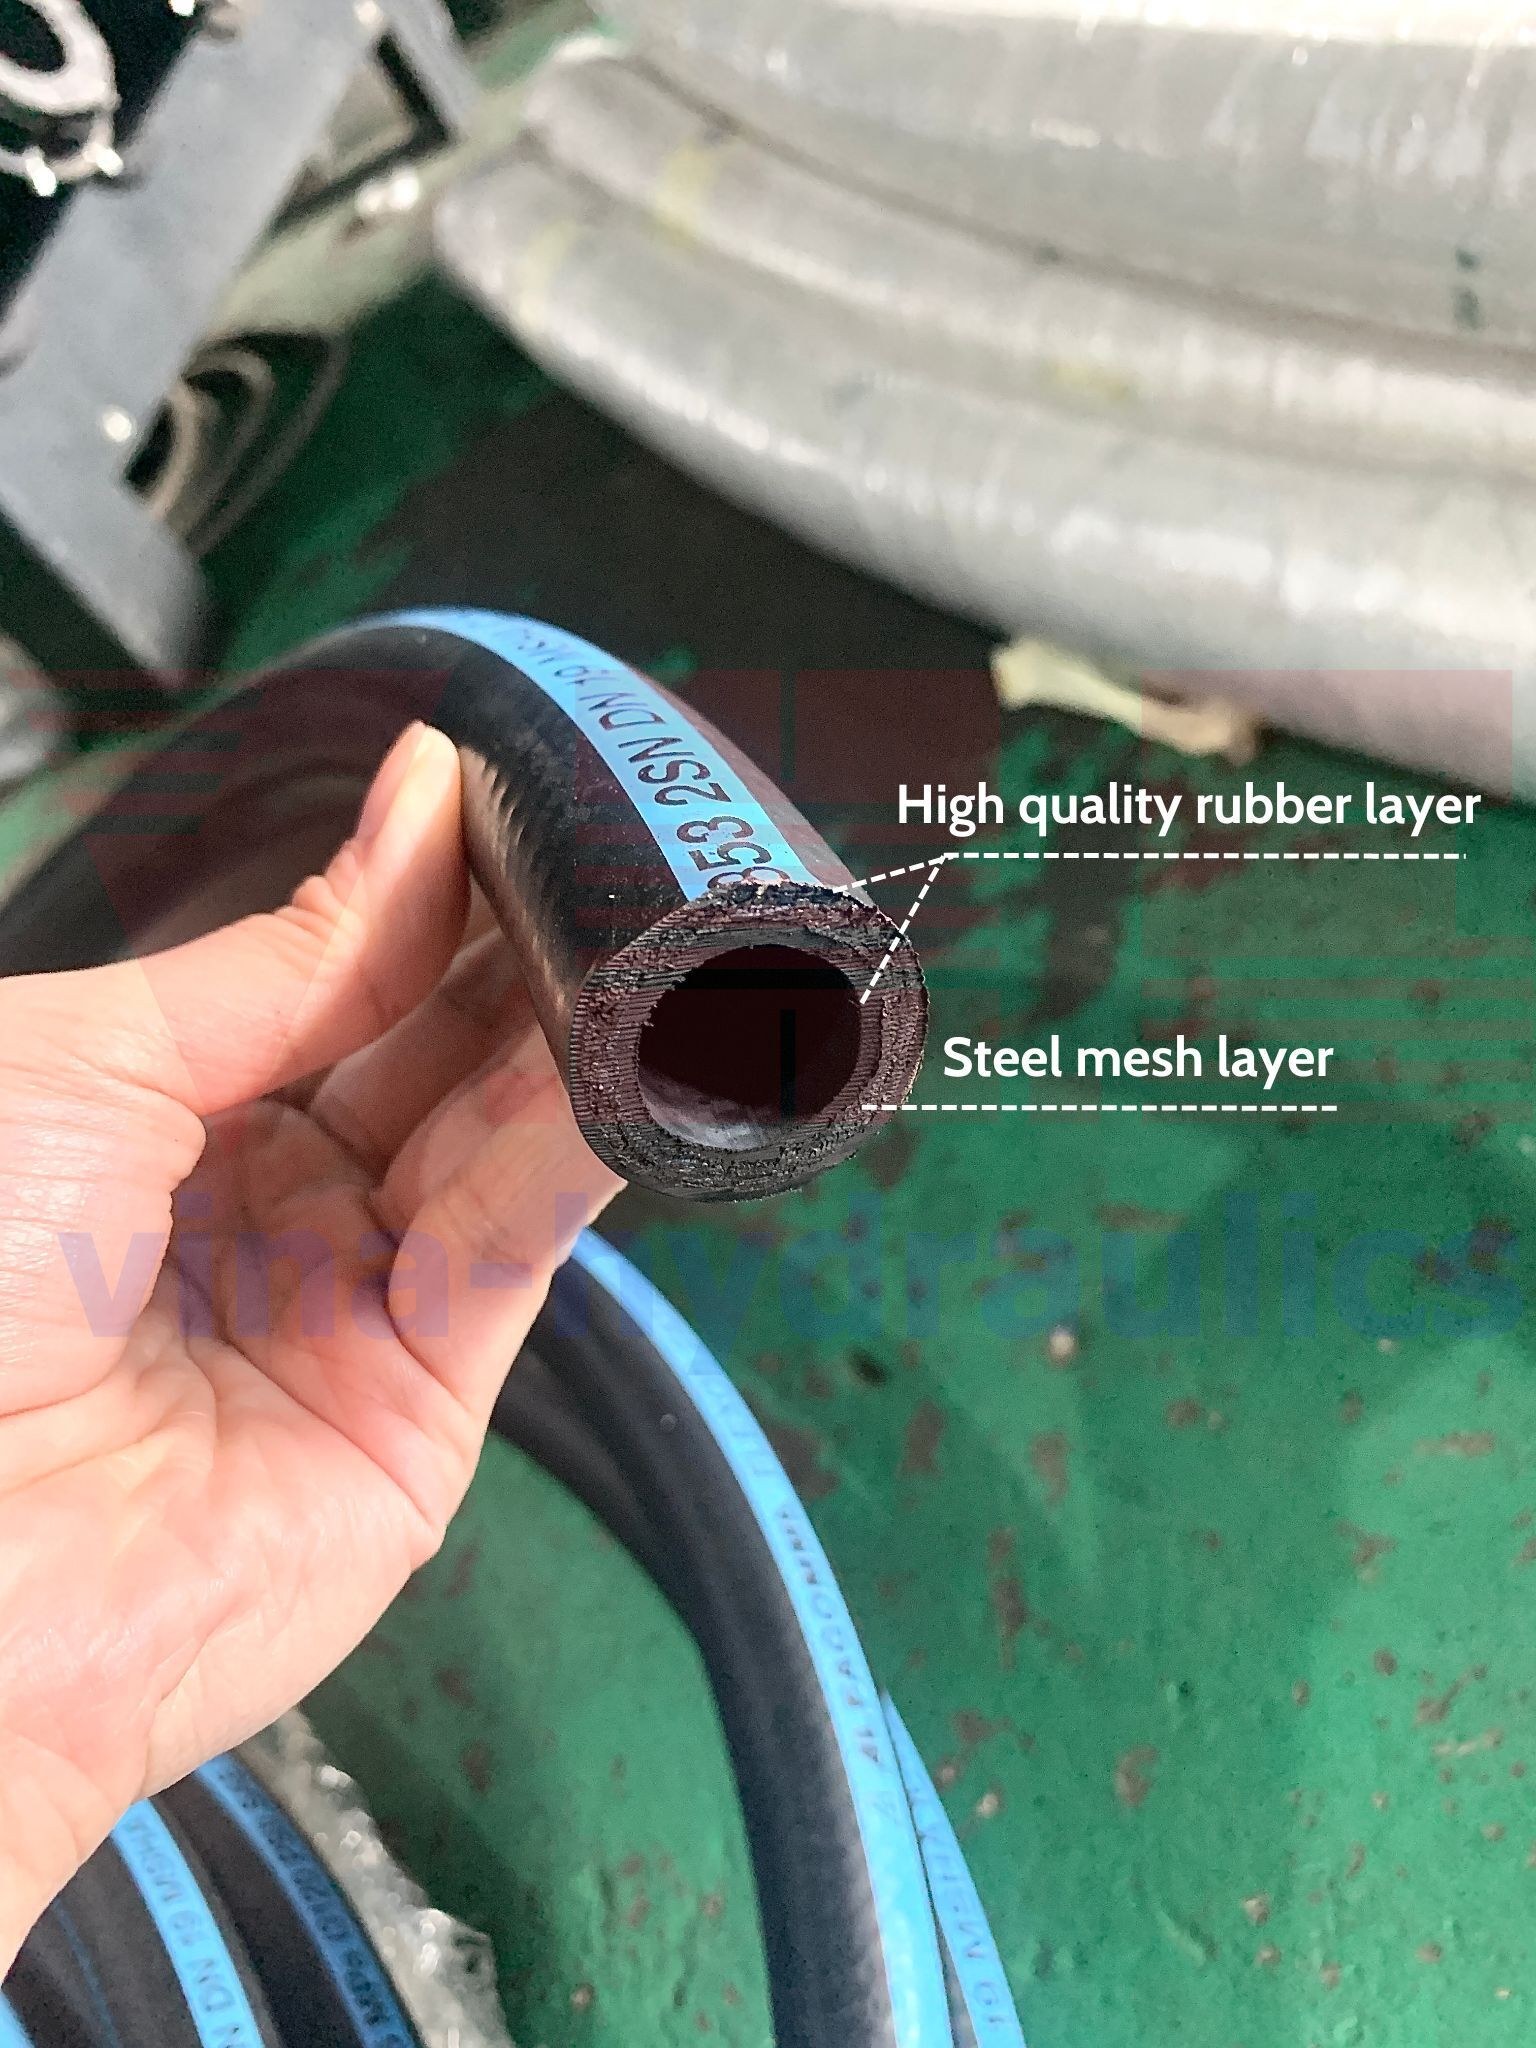 The material of hydraulic hose